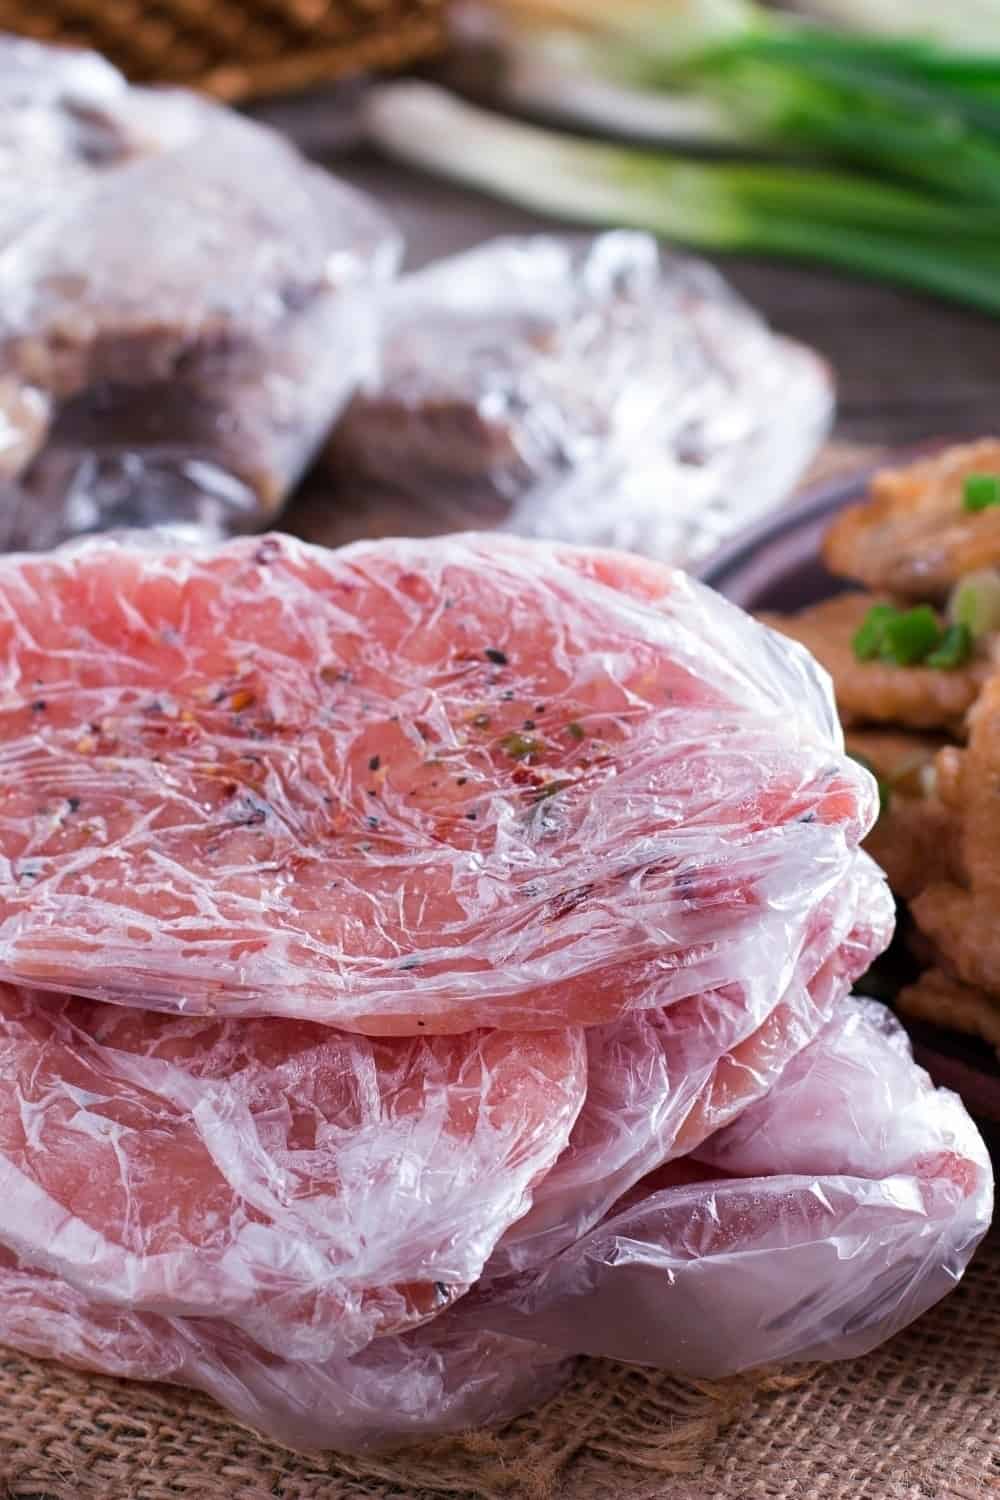 thawed meat in plastic bags